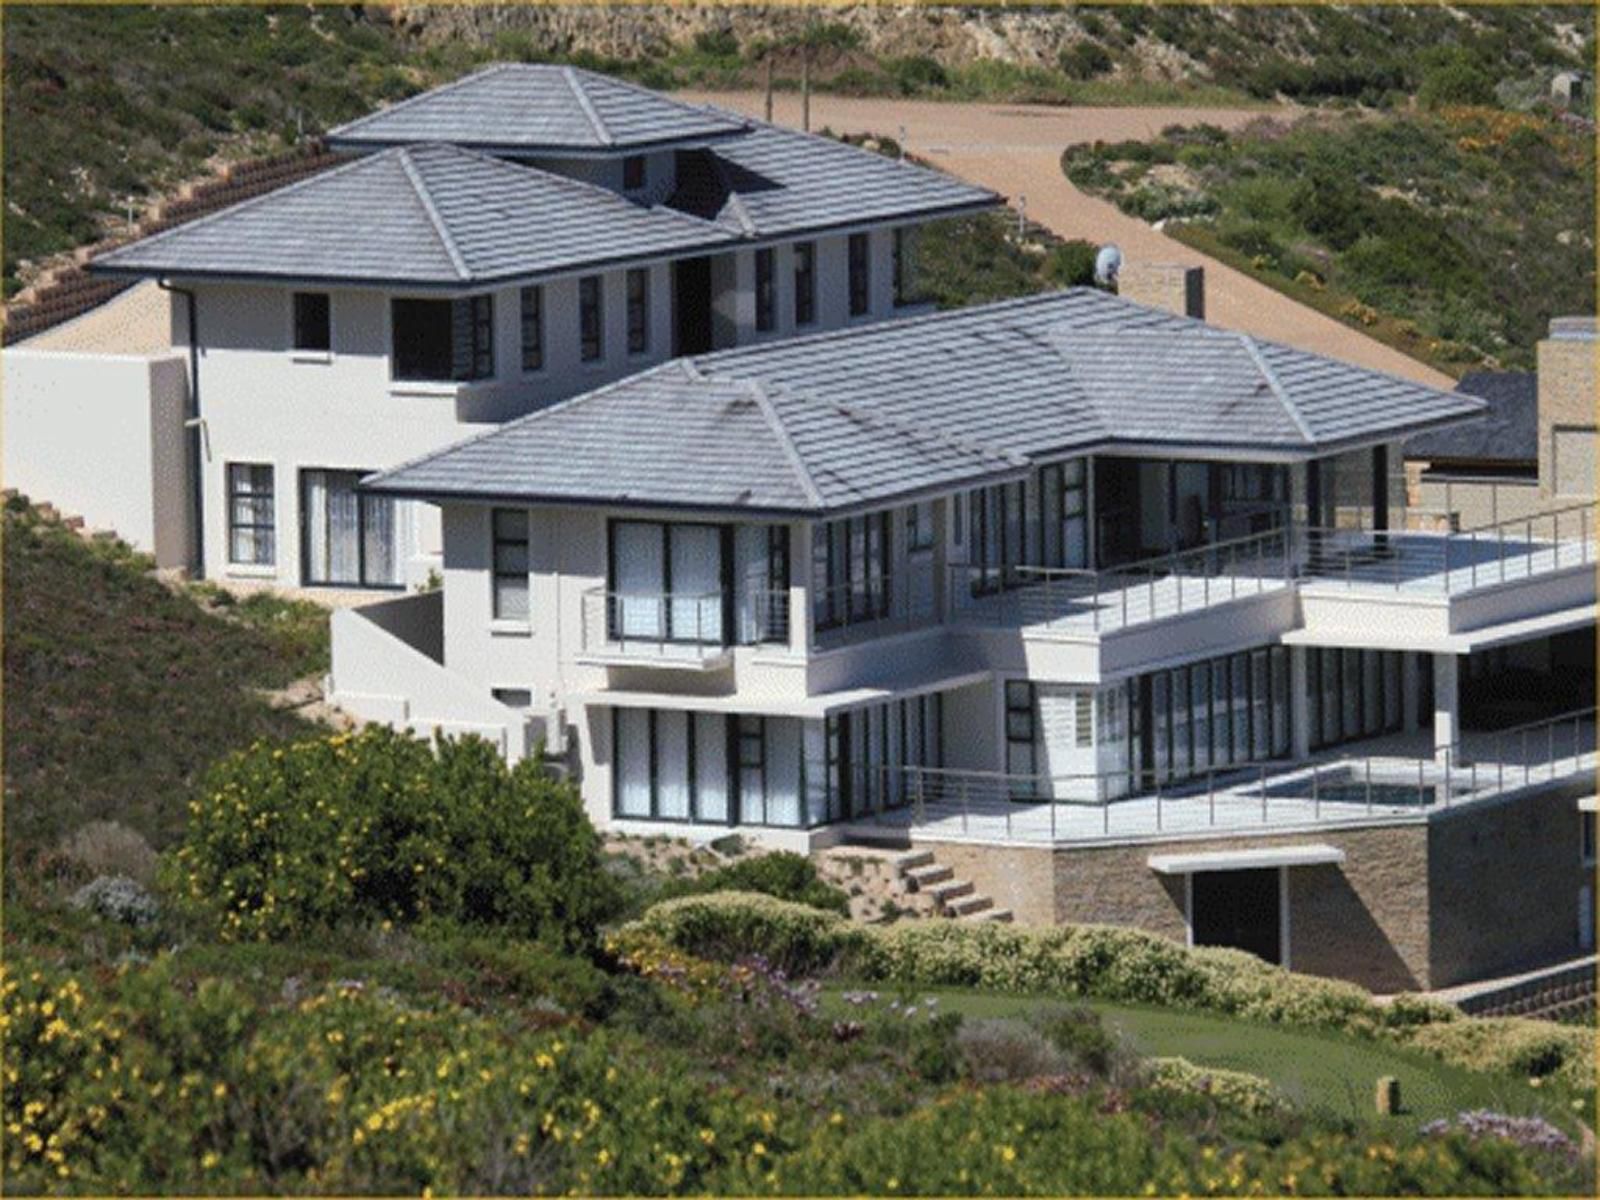 Leisure Rentals Pinnacle Point Golf Estate Pinnacle Point Mossel Bay Western Cape South Africa House, Building, Architecture